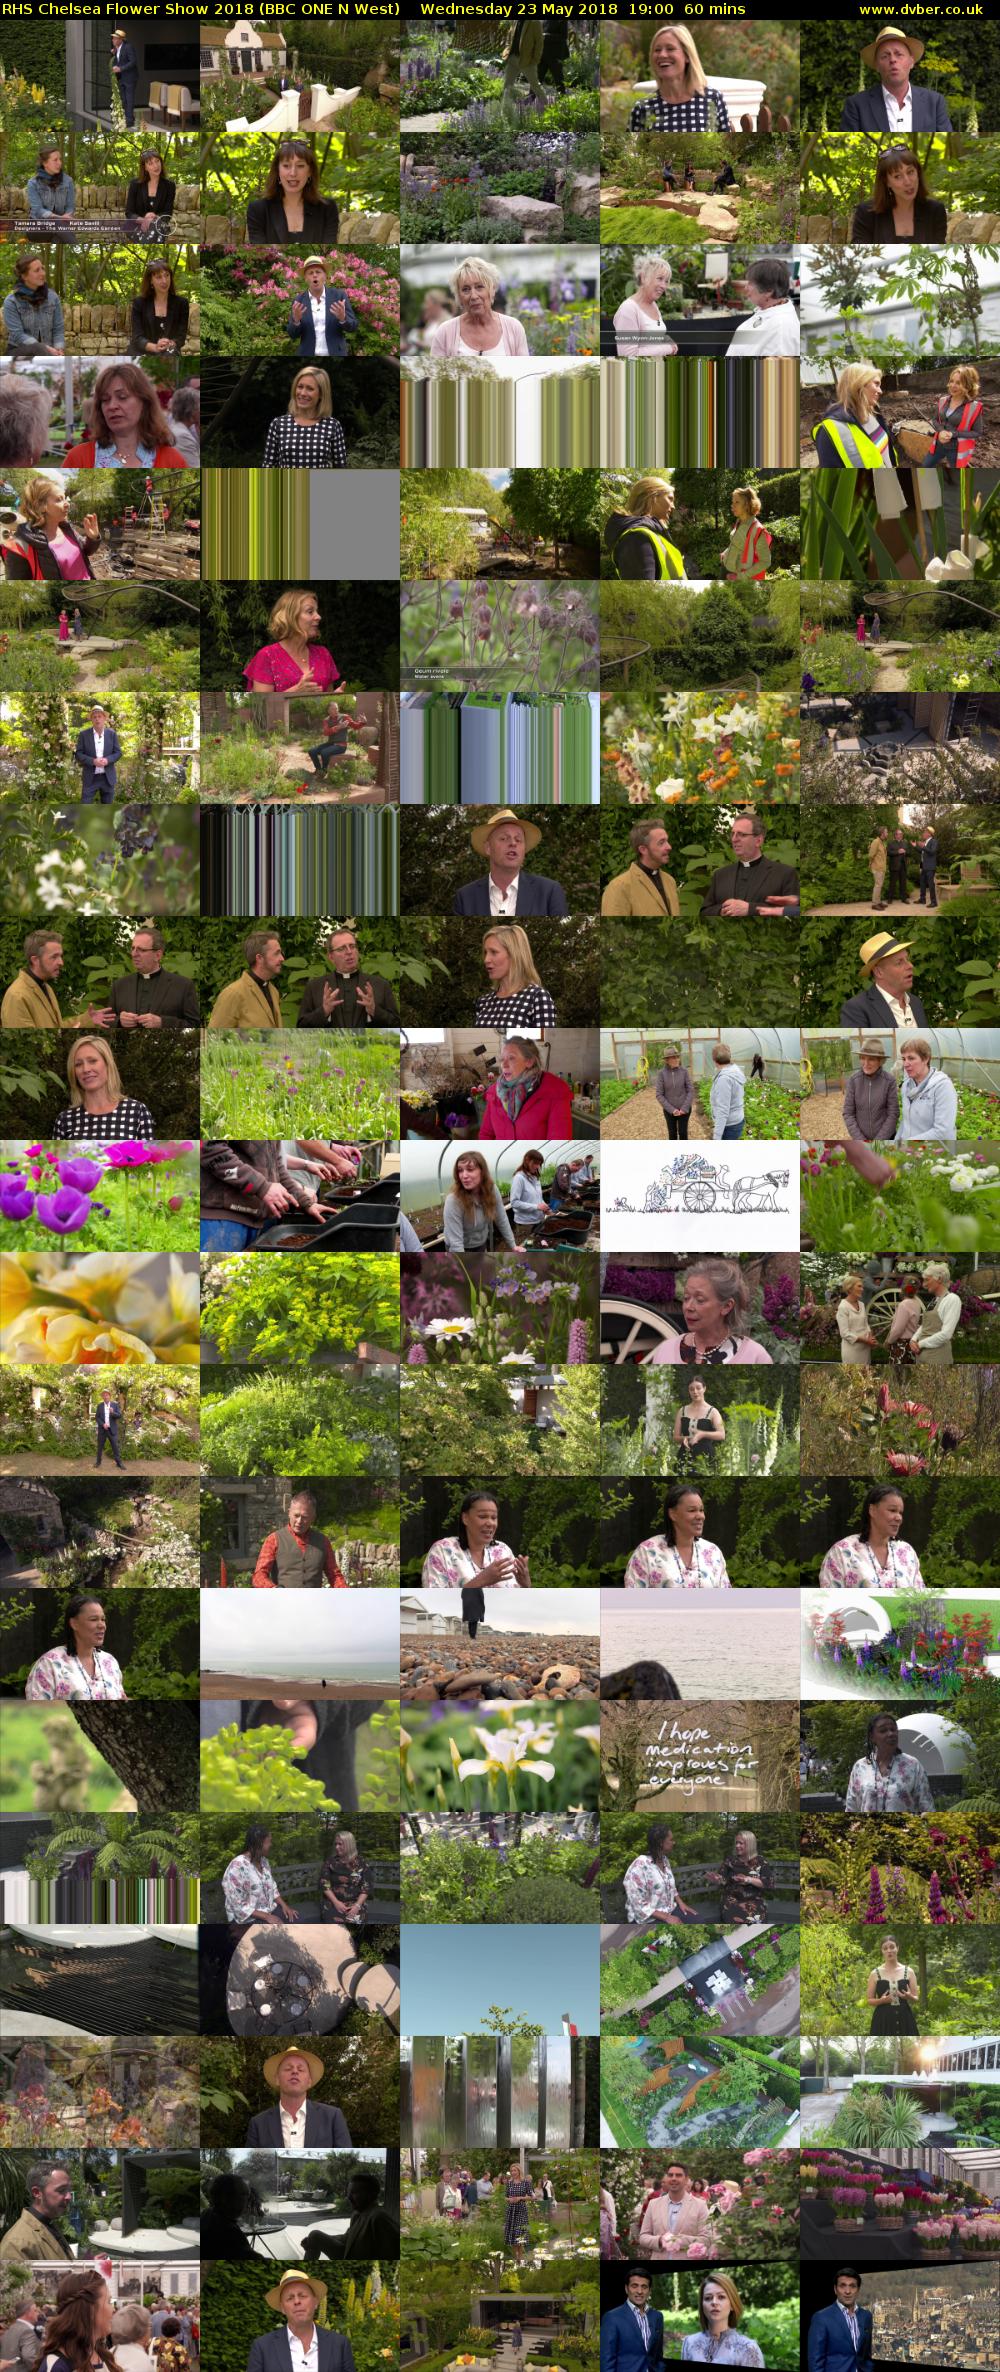 RHS Chelsea Flower Show 2018 (BBC ONE N West) Wednesday 23 May 2018 19:00 - 20:00